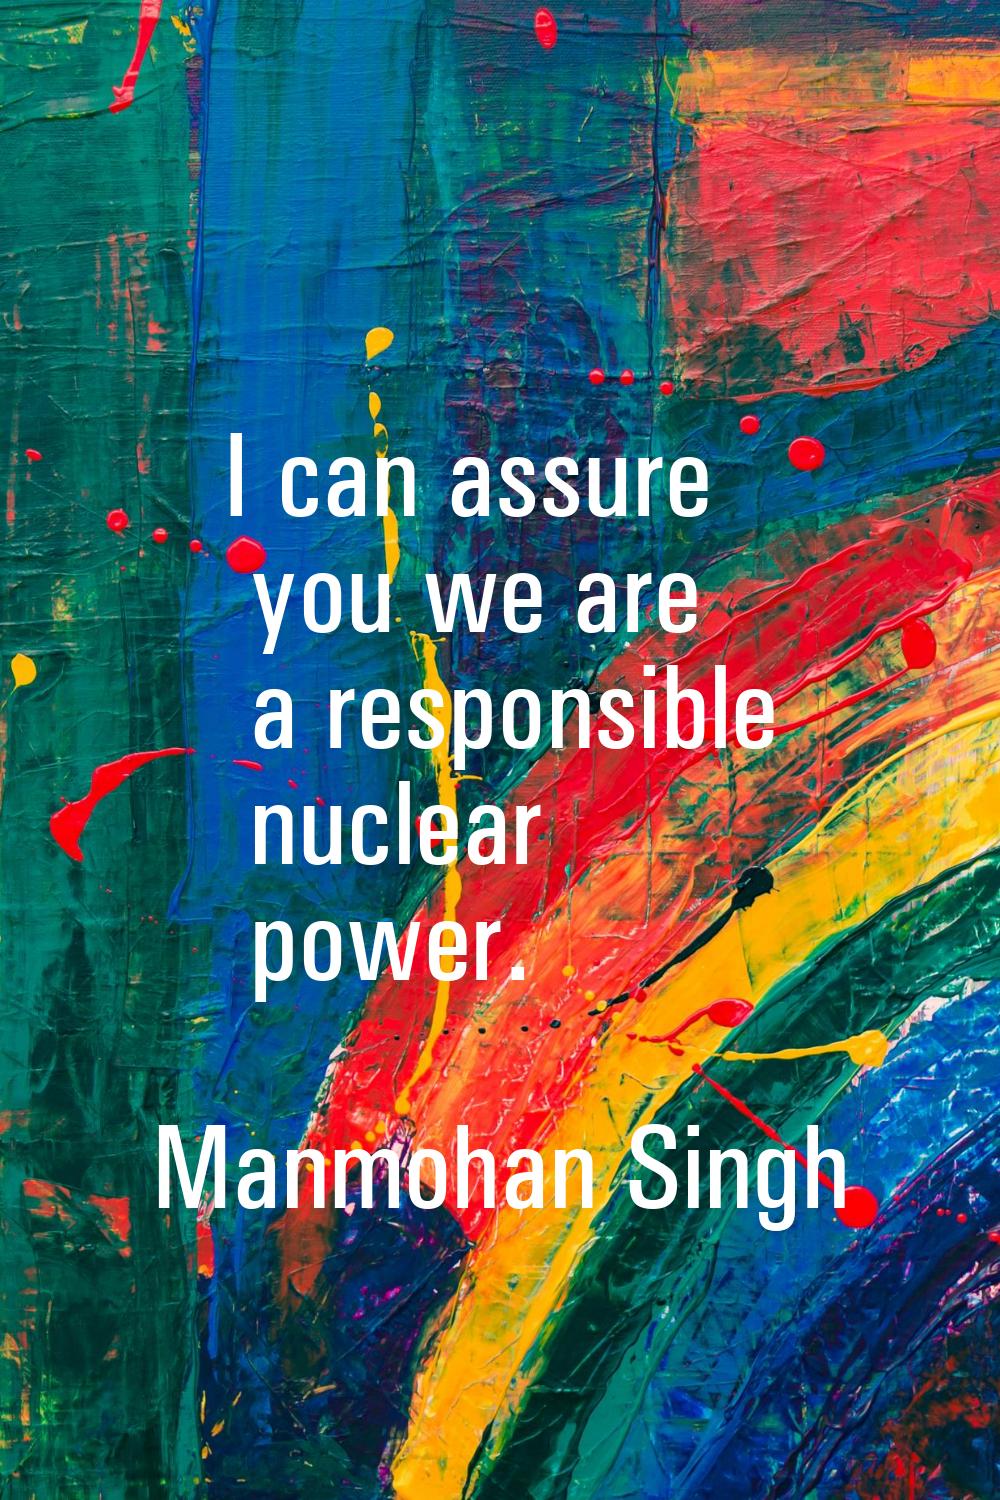 I can assure you we are a responsible nuclear power.